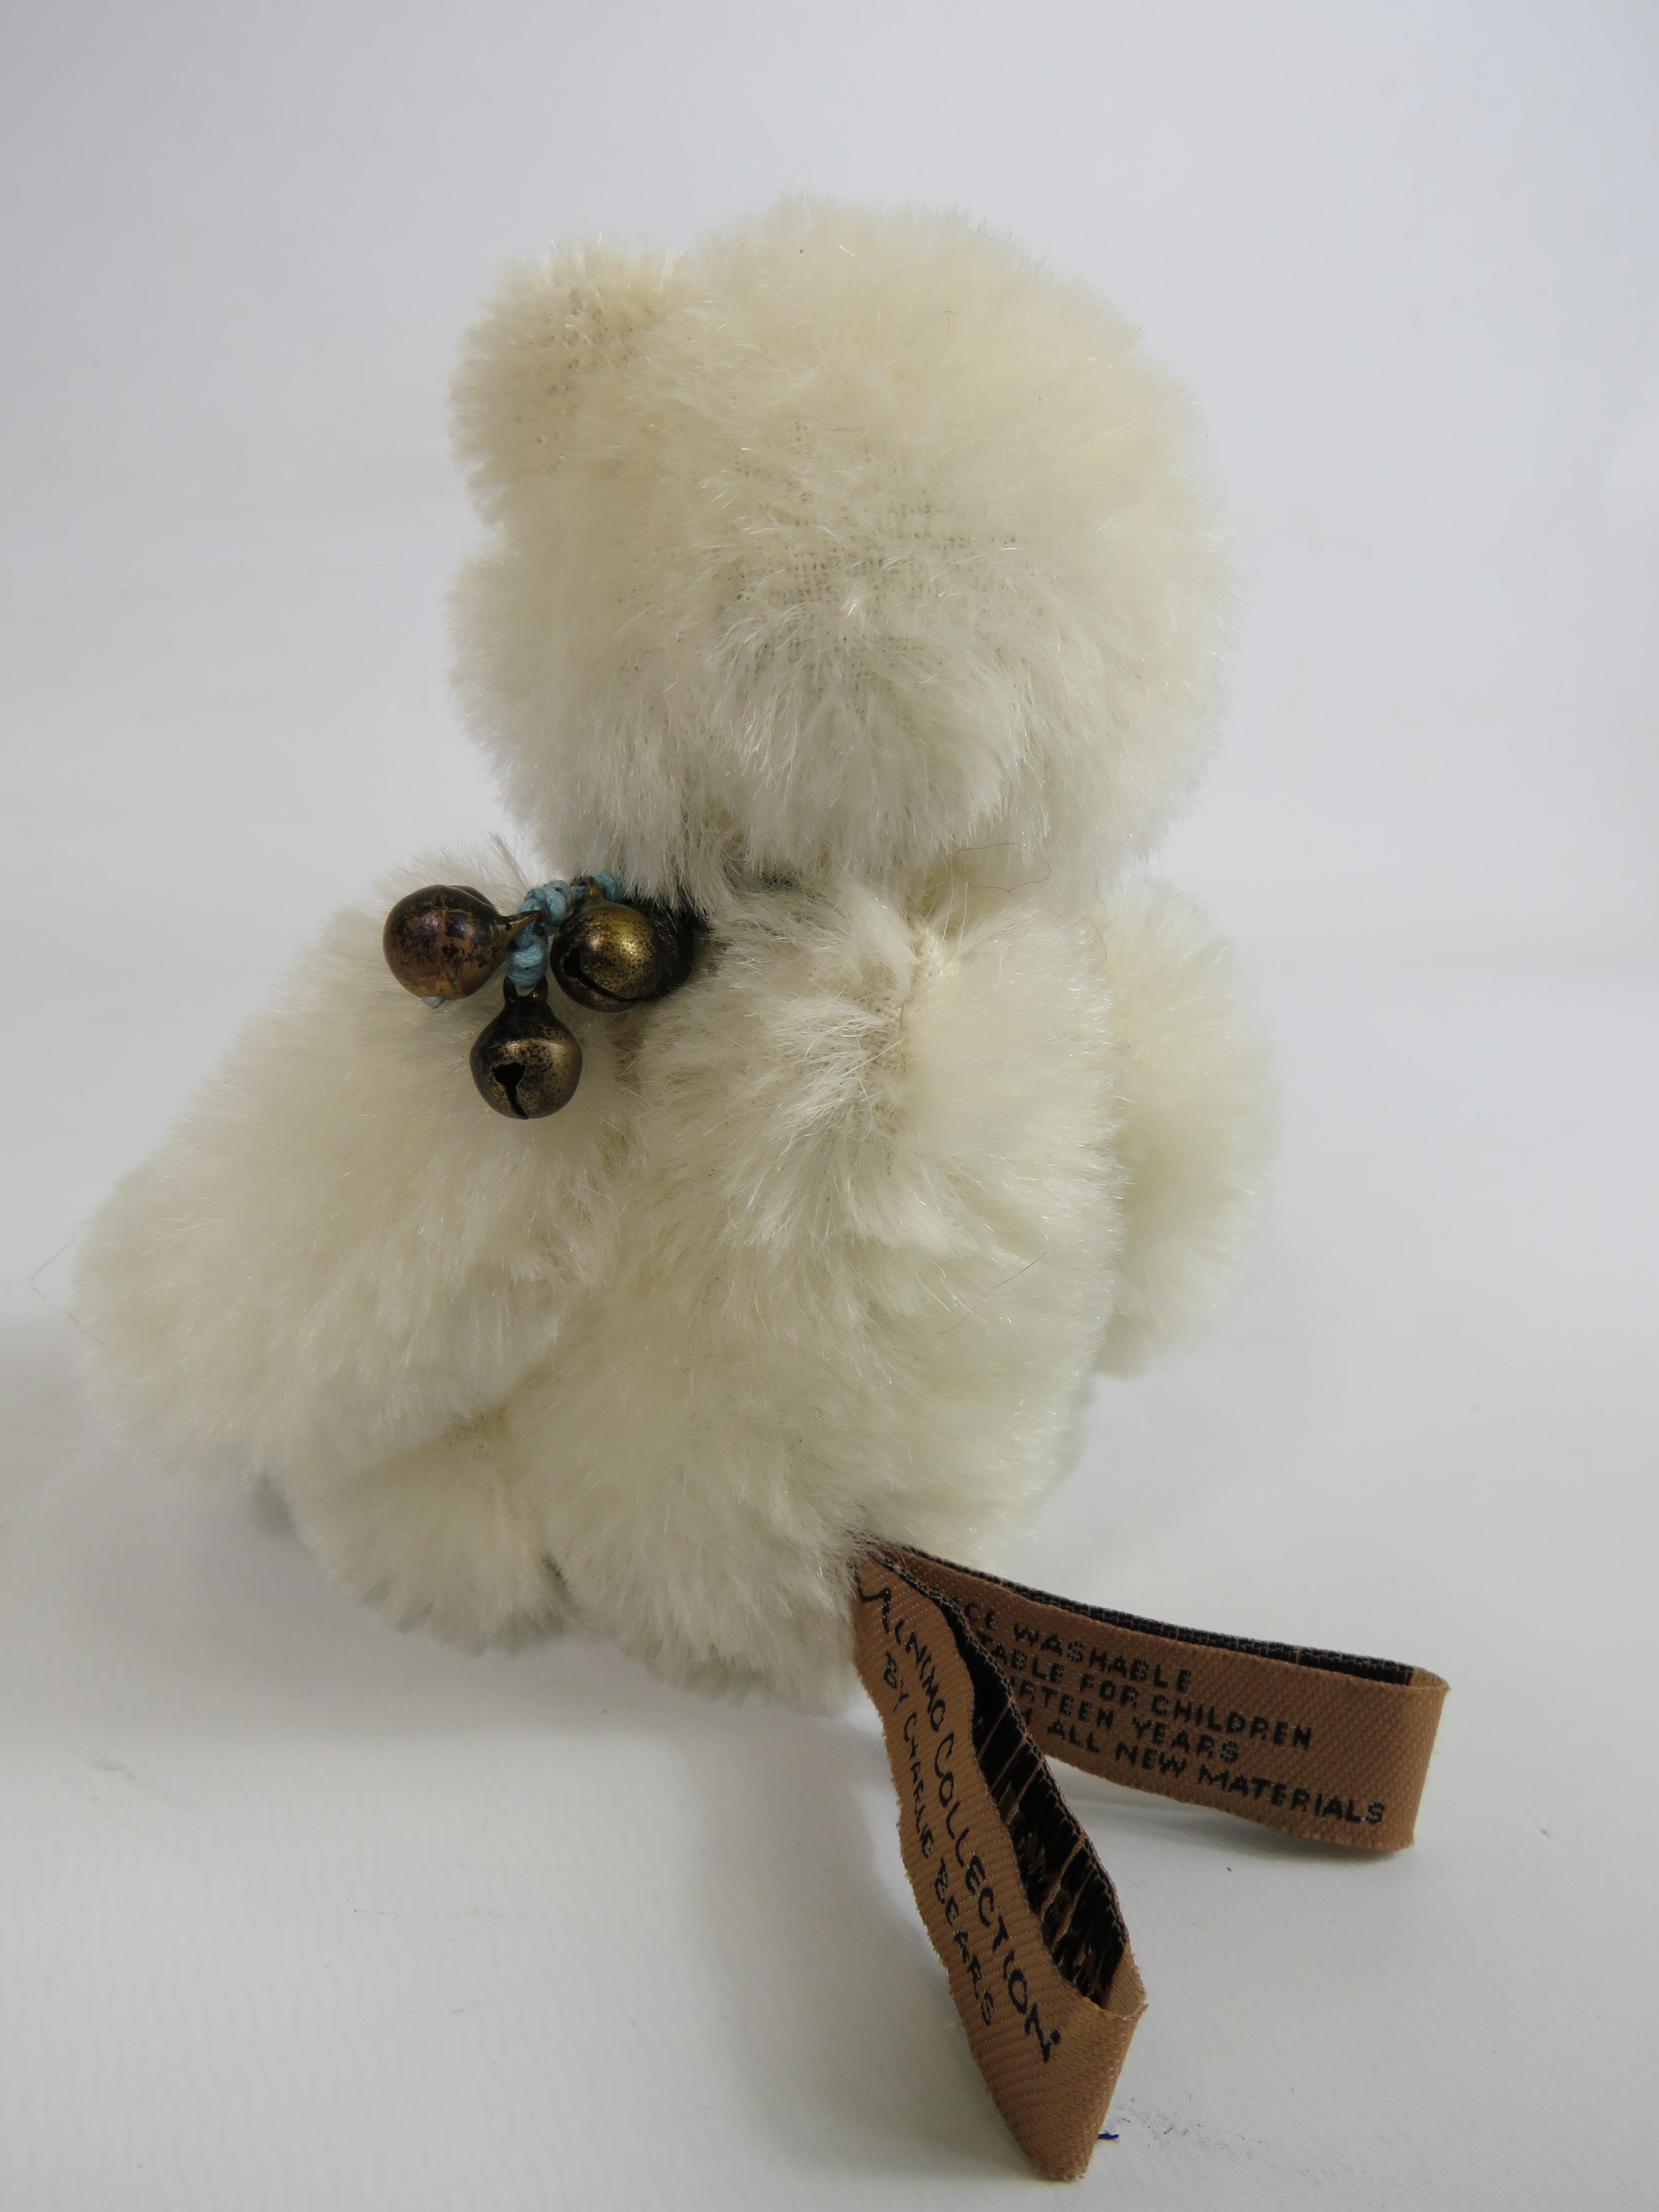 Charlie Bear Limited edition Minimo collection "Icicle" No 77 of 2000. - Image 3 of 5